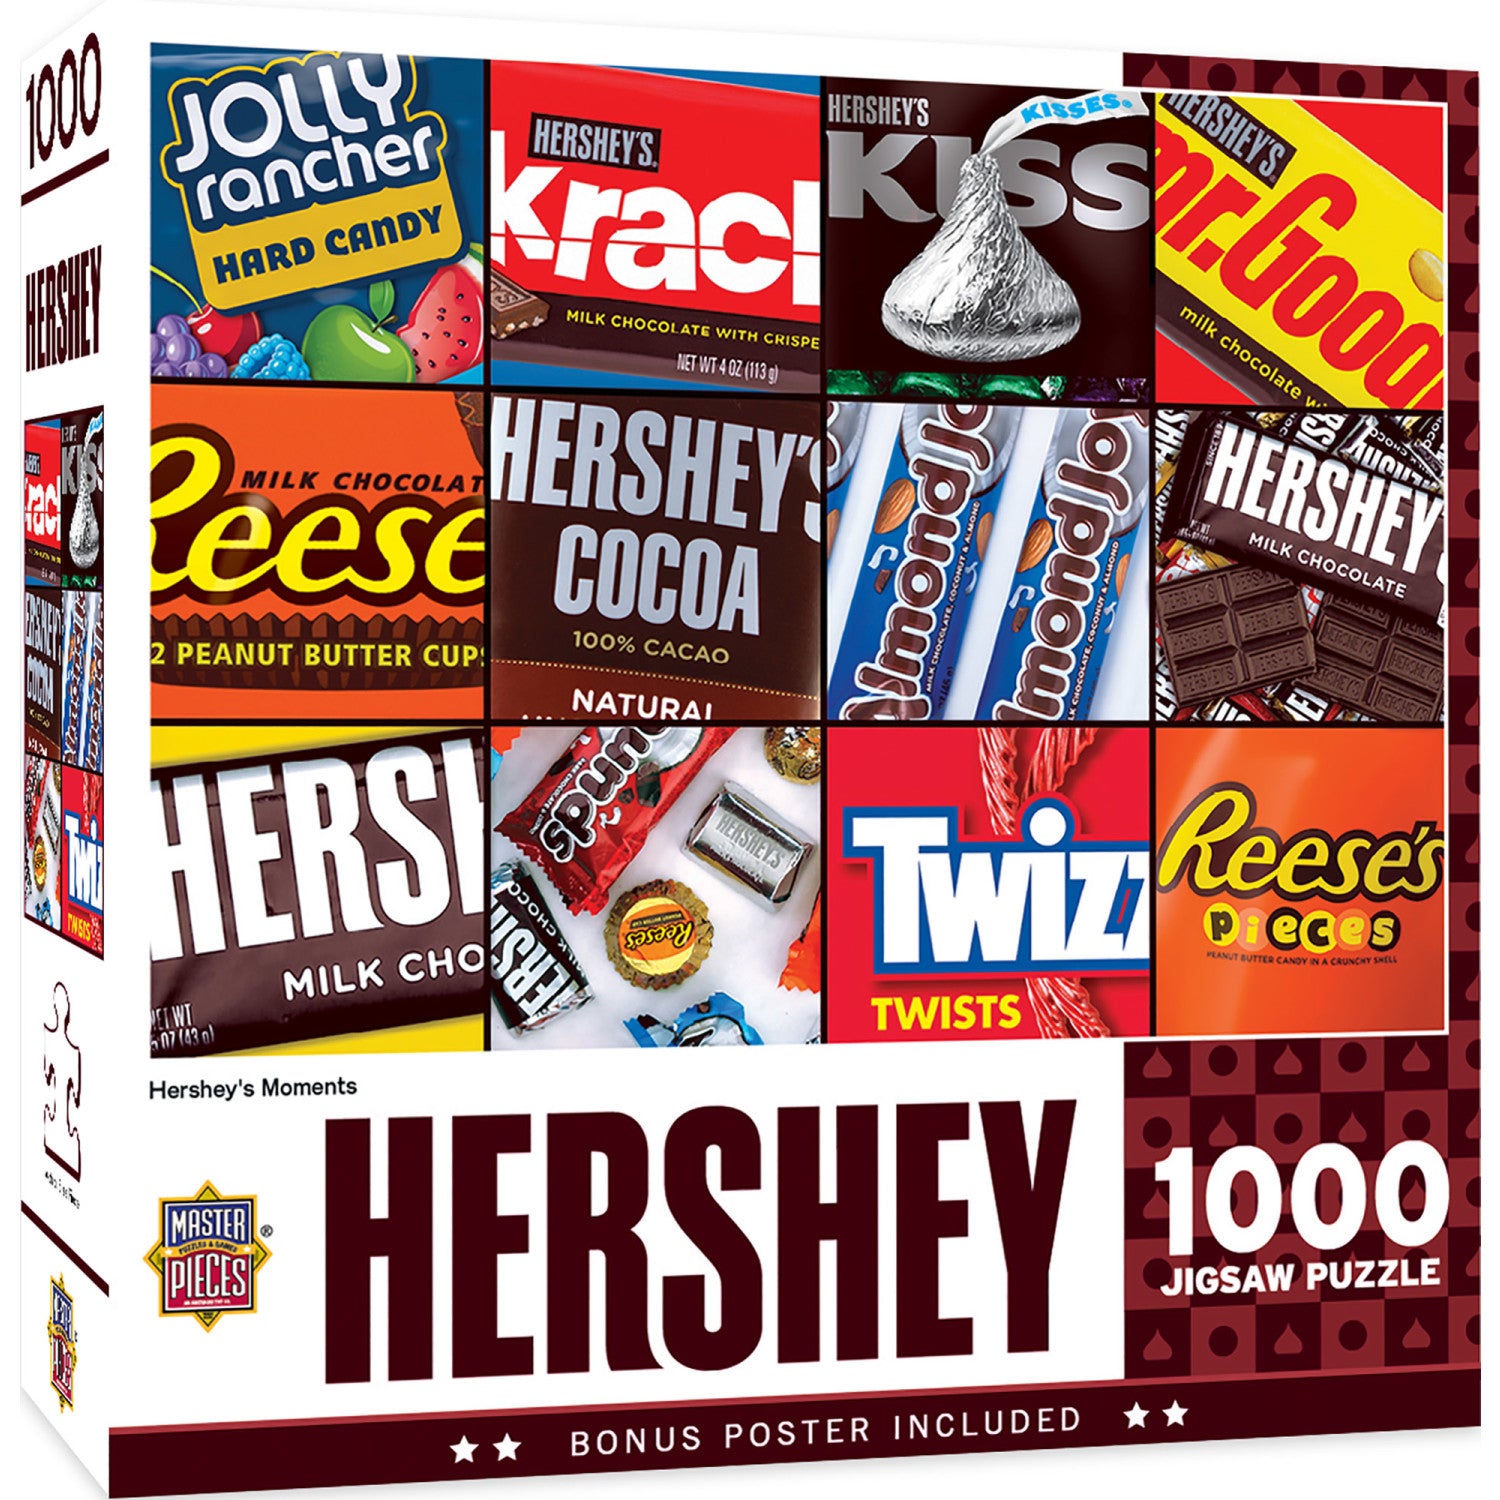 Hershey's Moments - 1000 Piece Puzzle